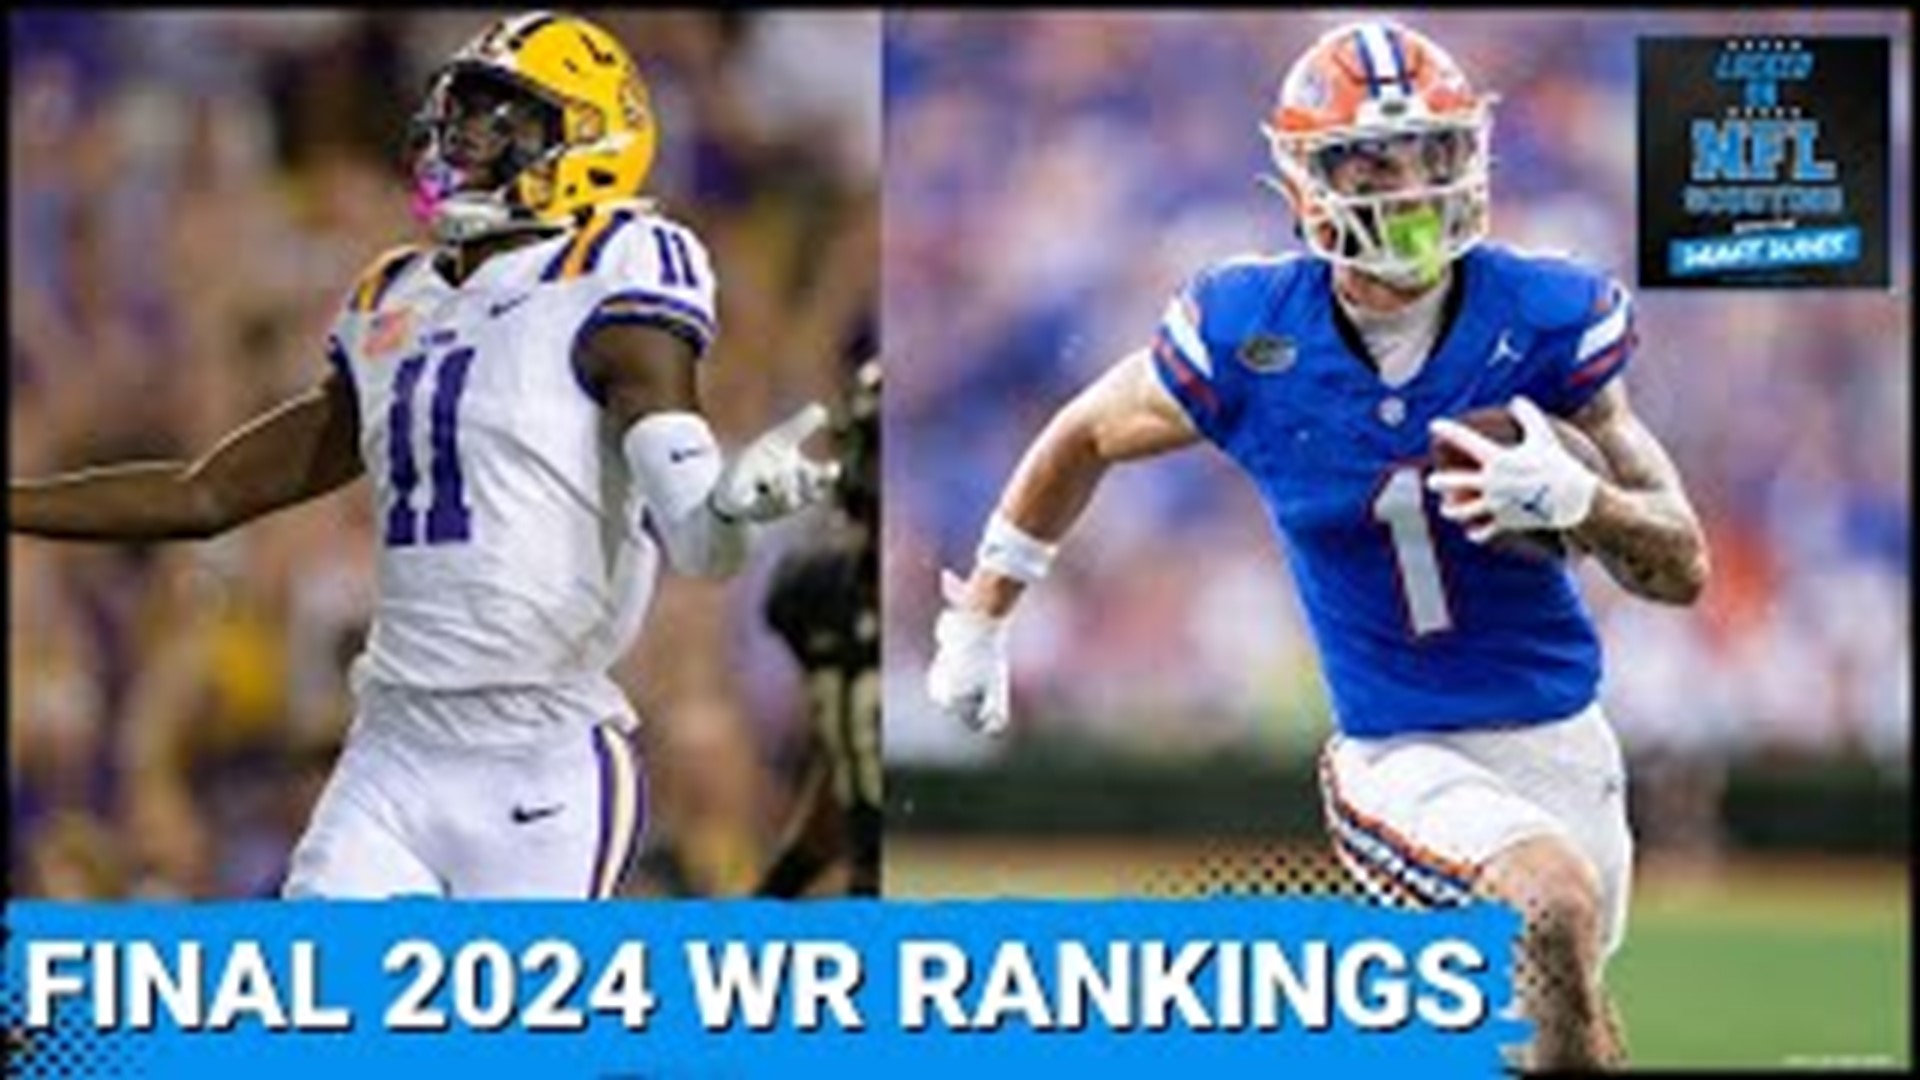 Much has been made about the talent available at wide receiver in the 2024 NFL Draft so it’s time to share our final rankings.